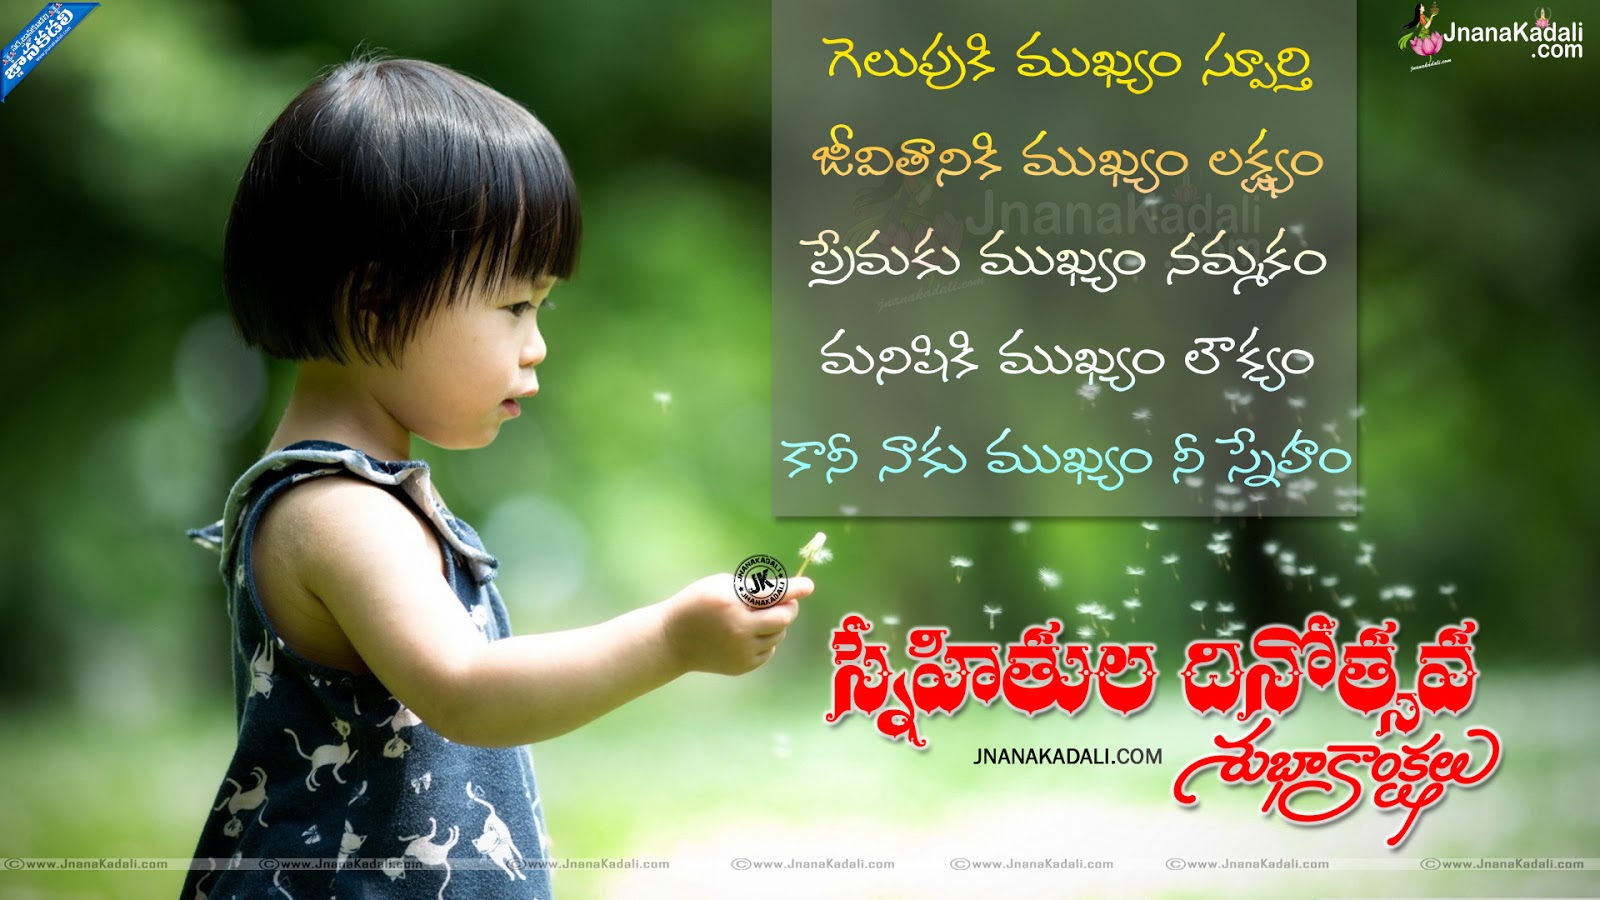 Friendship day telugu quotations with hd wallpapers International ...